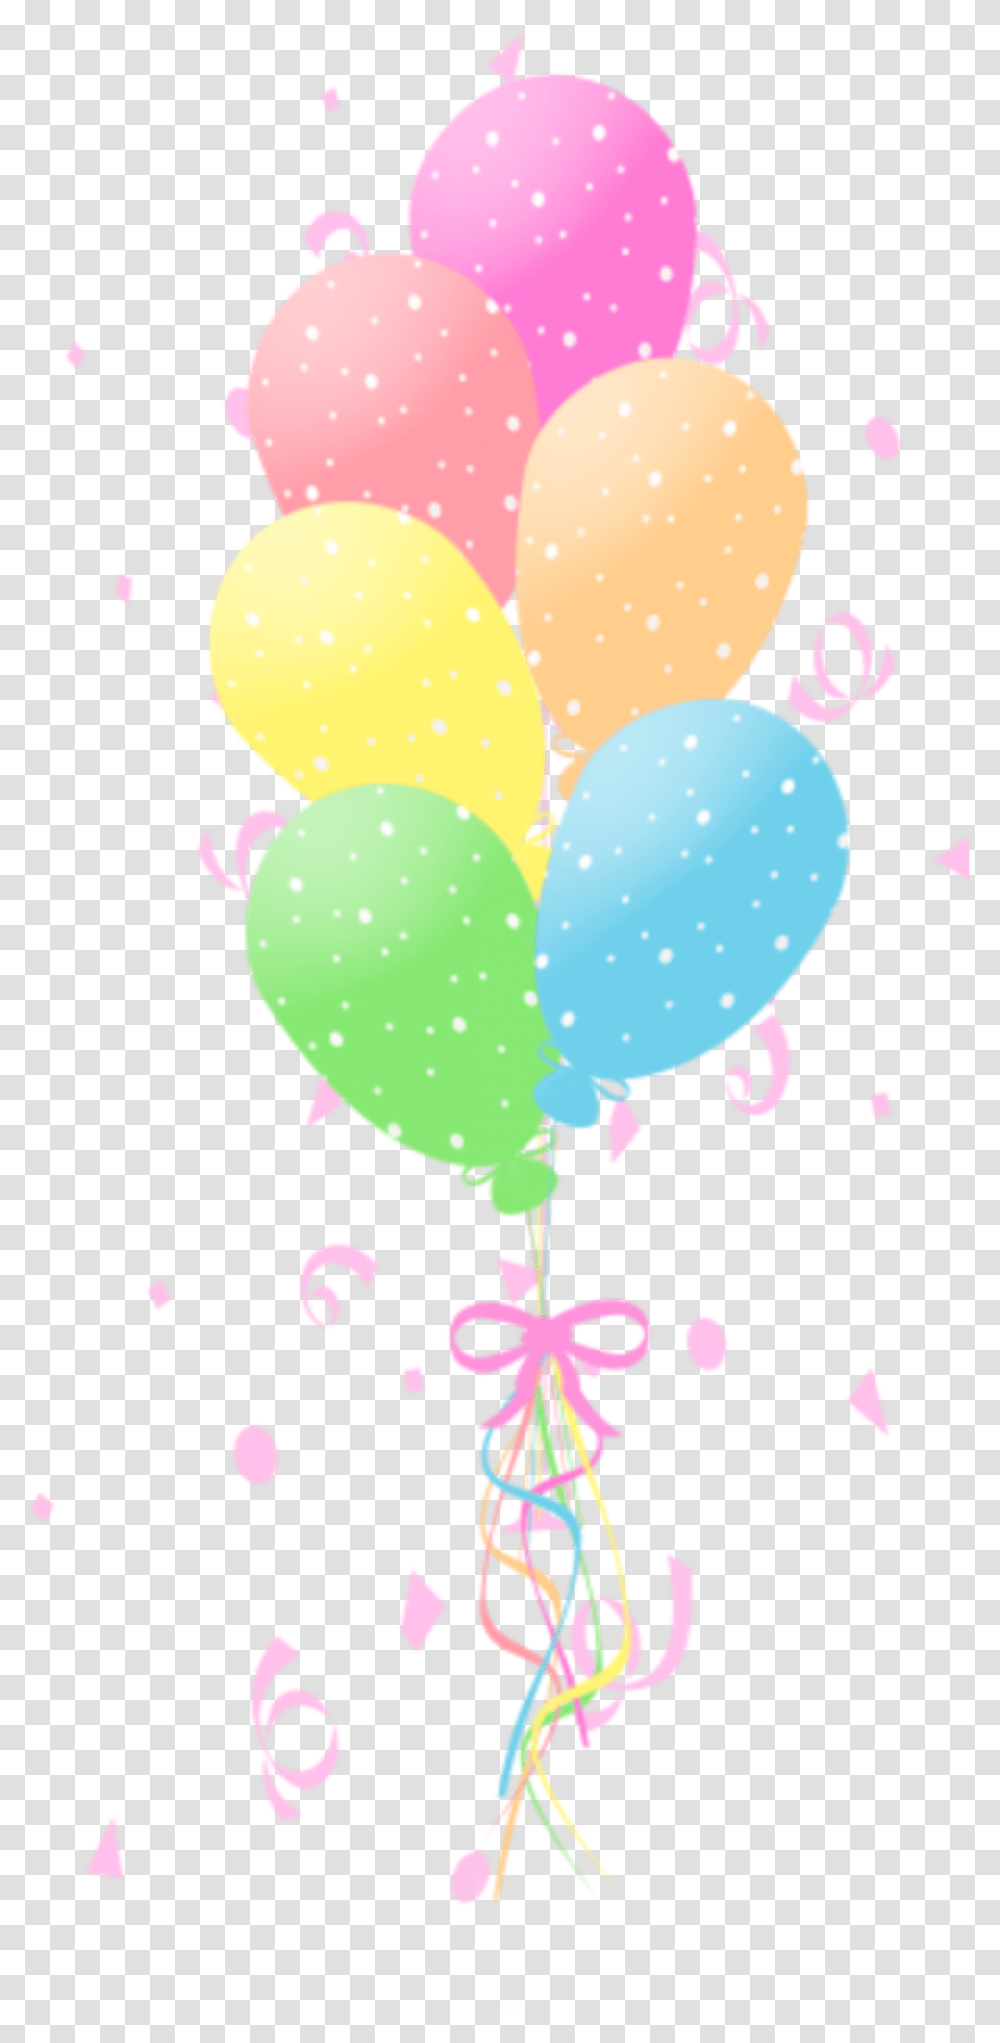 Ftestickers Confetti Balloons Colorful Pastelcolors Balloon Transparent Png